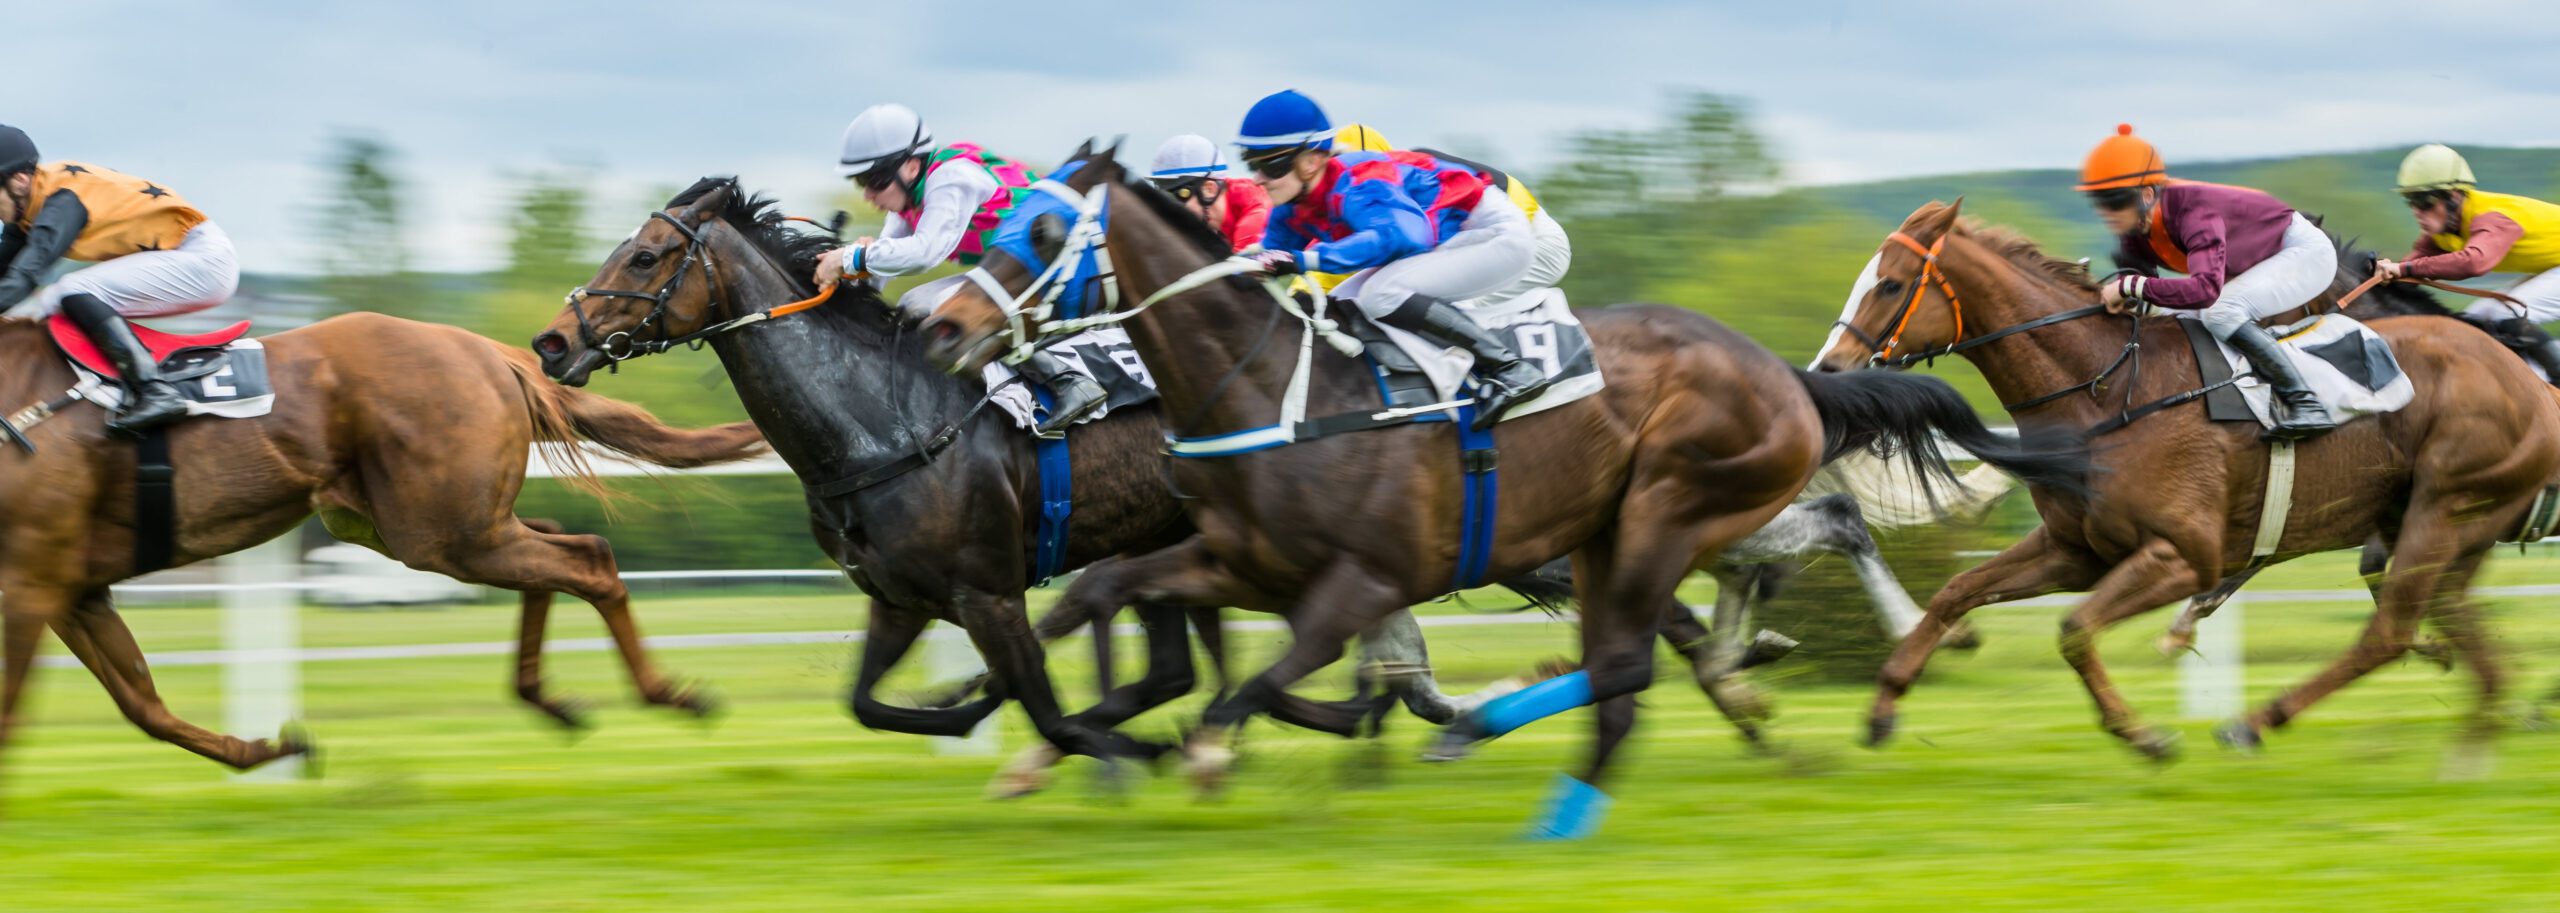 Picture of several race horses and jockeys, racing on a race track